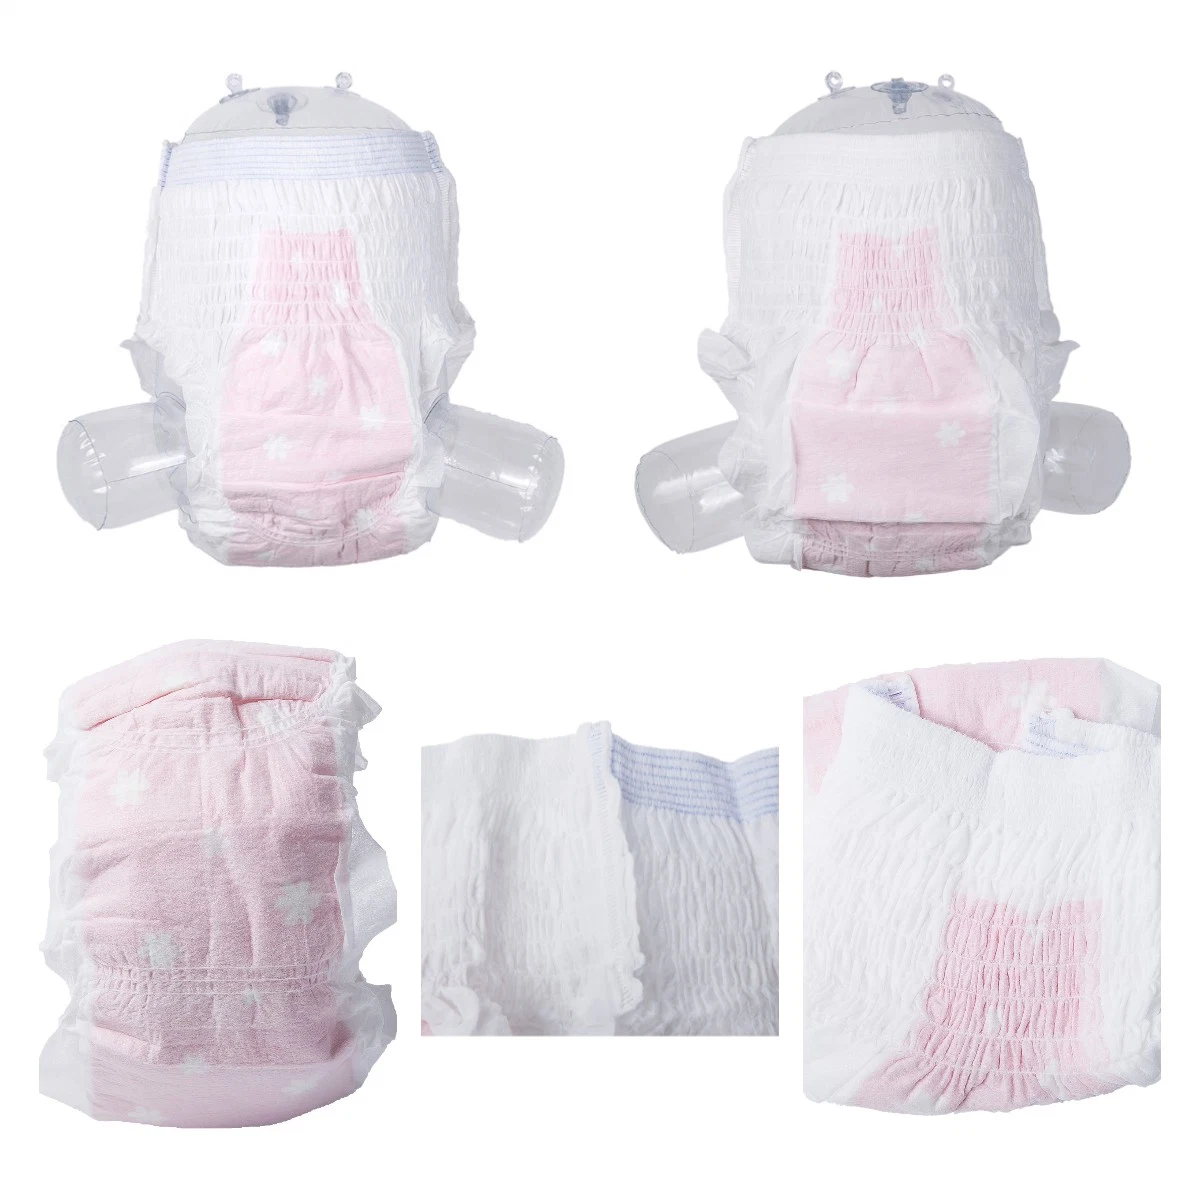 Hot Sale Disposable Female Period Underwear Sanitary Pants with Sanitary Pad Tampon